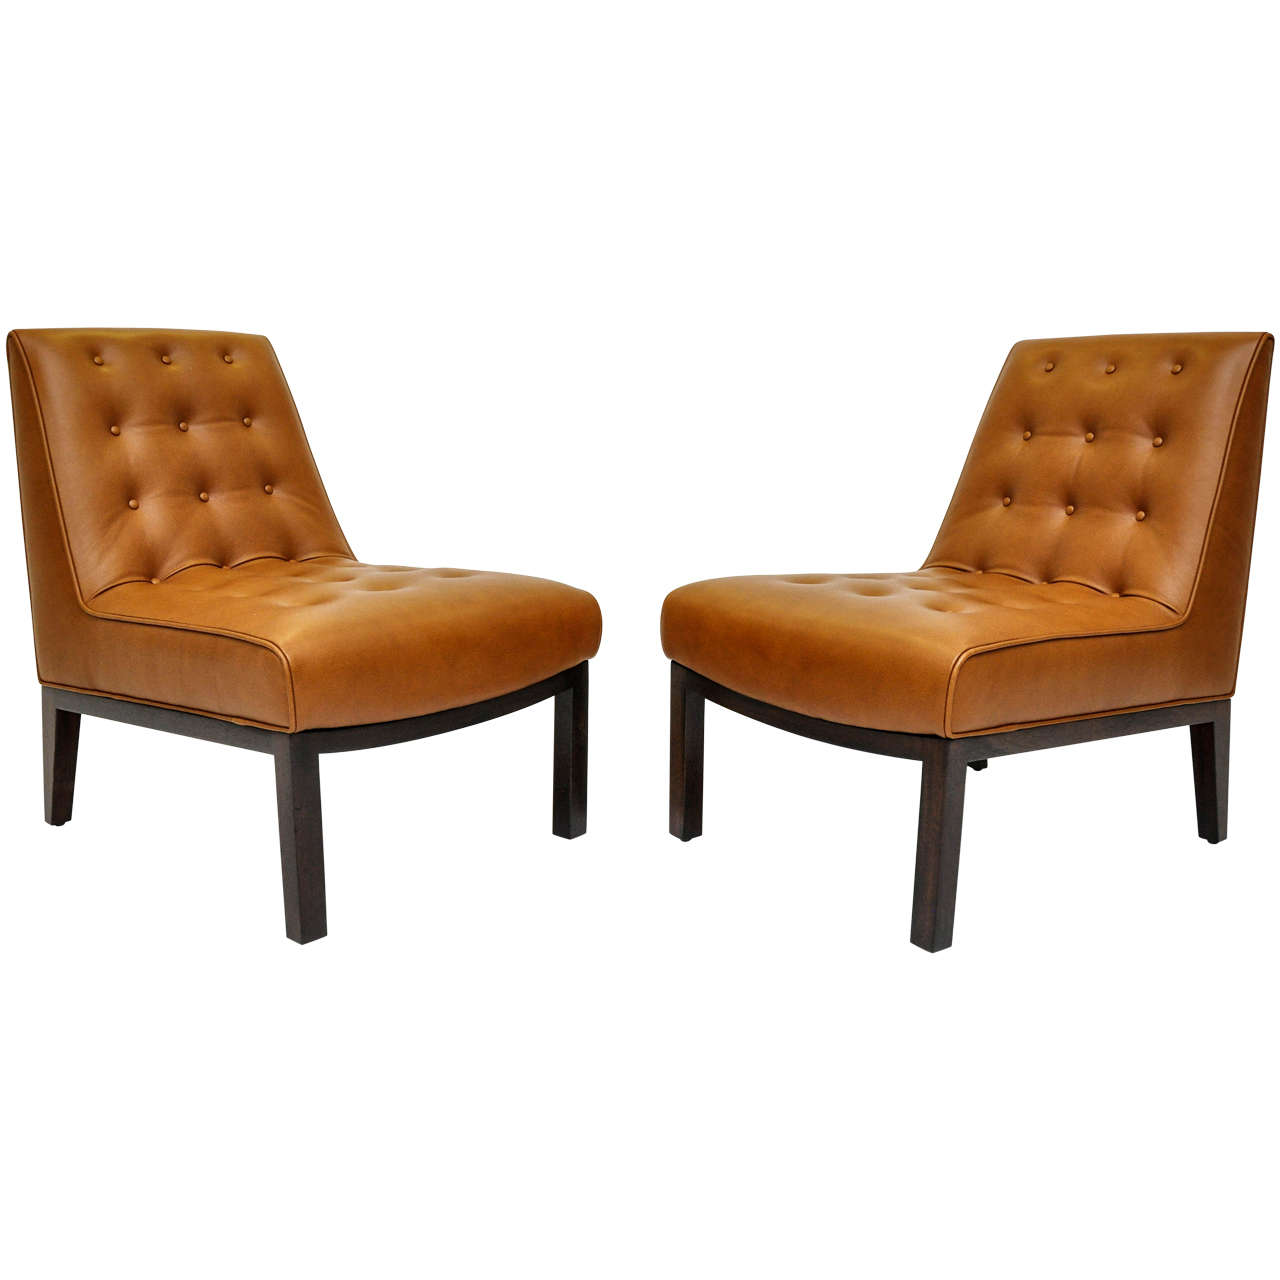 Slipper chairs designed by Edward Wormley for Dunbar, circa 1950s. Newly upholstered in cigar leather over refinished bases. Fully restored.